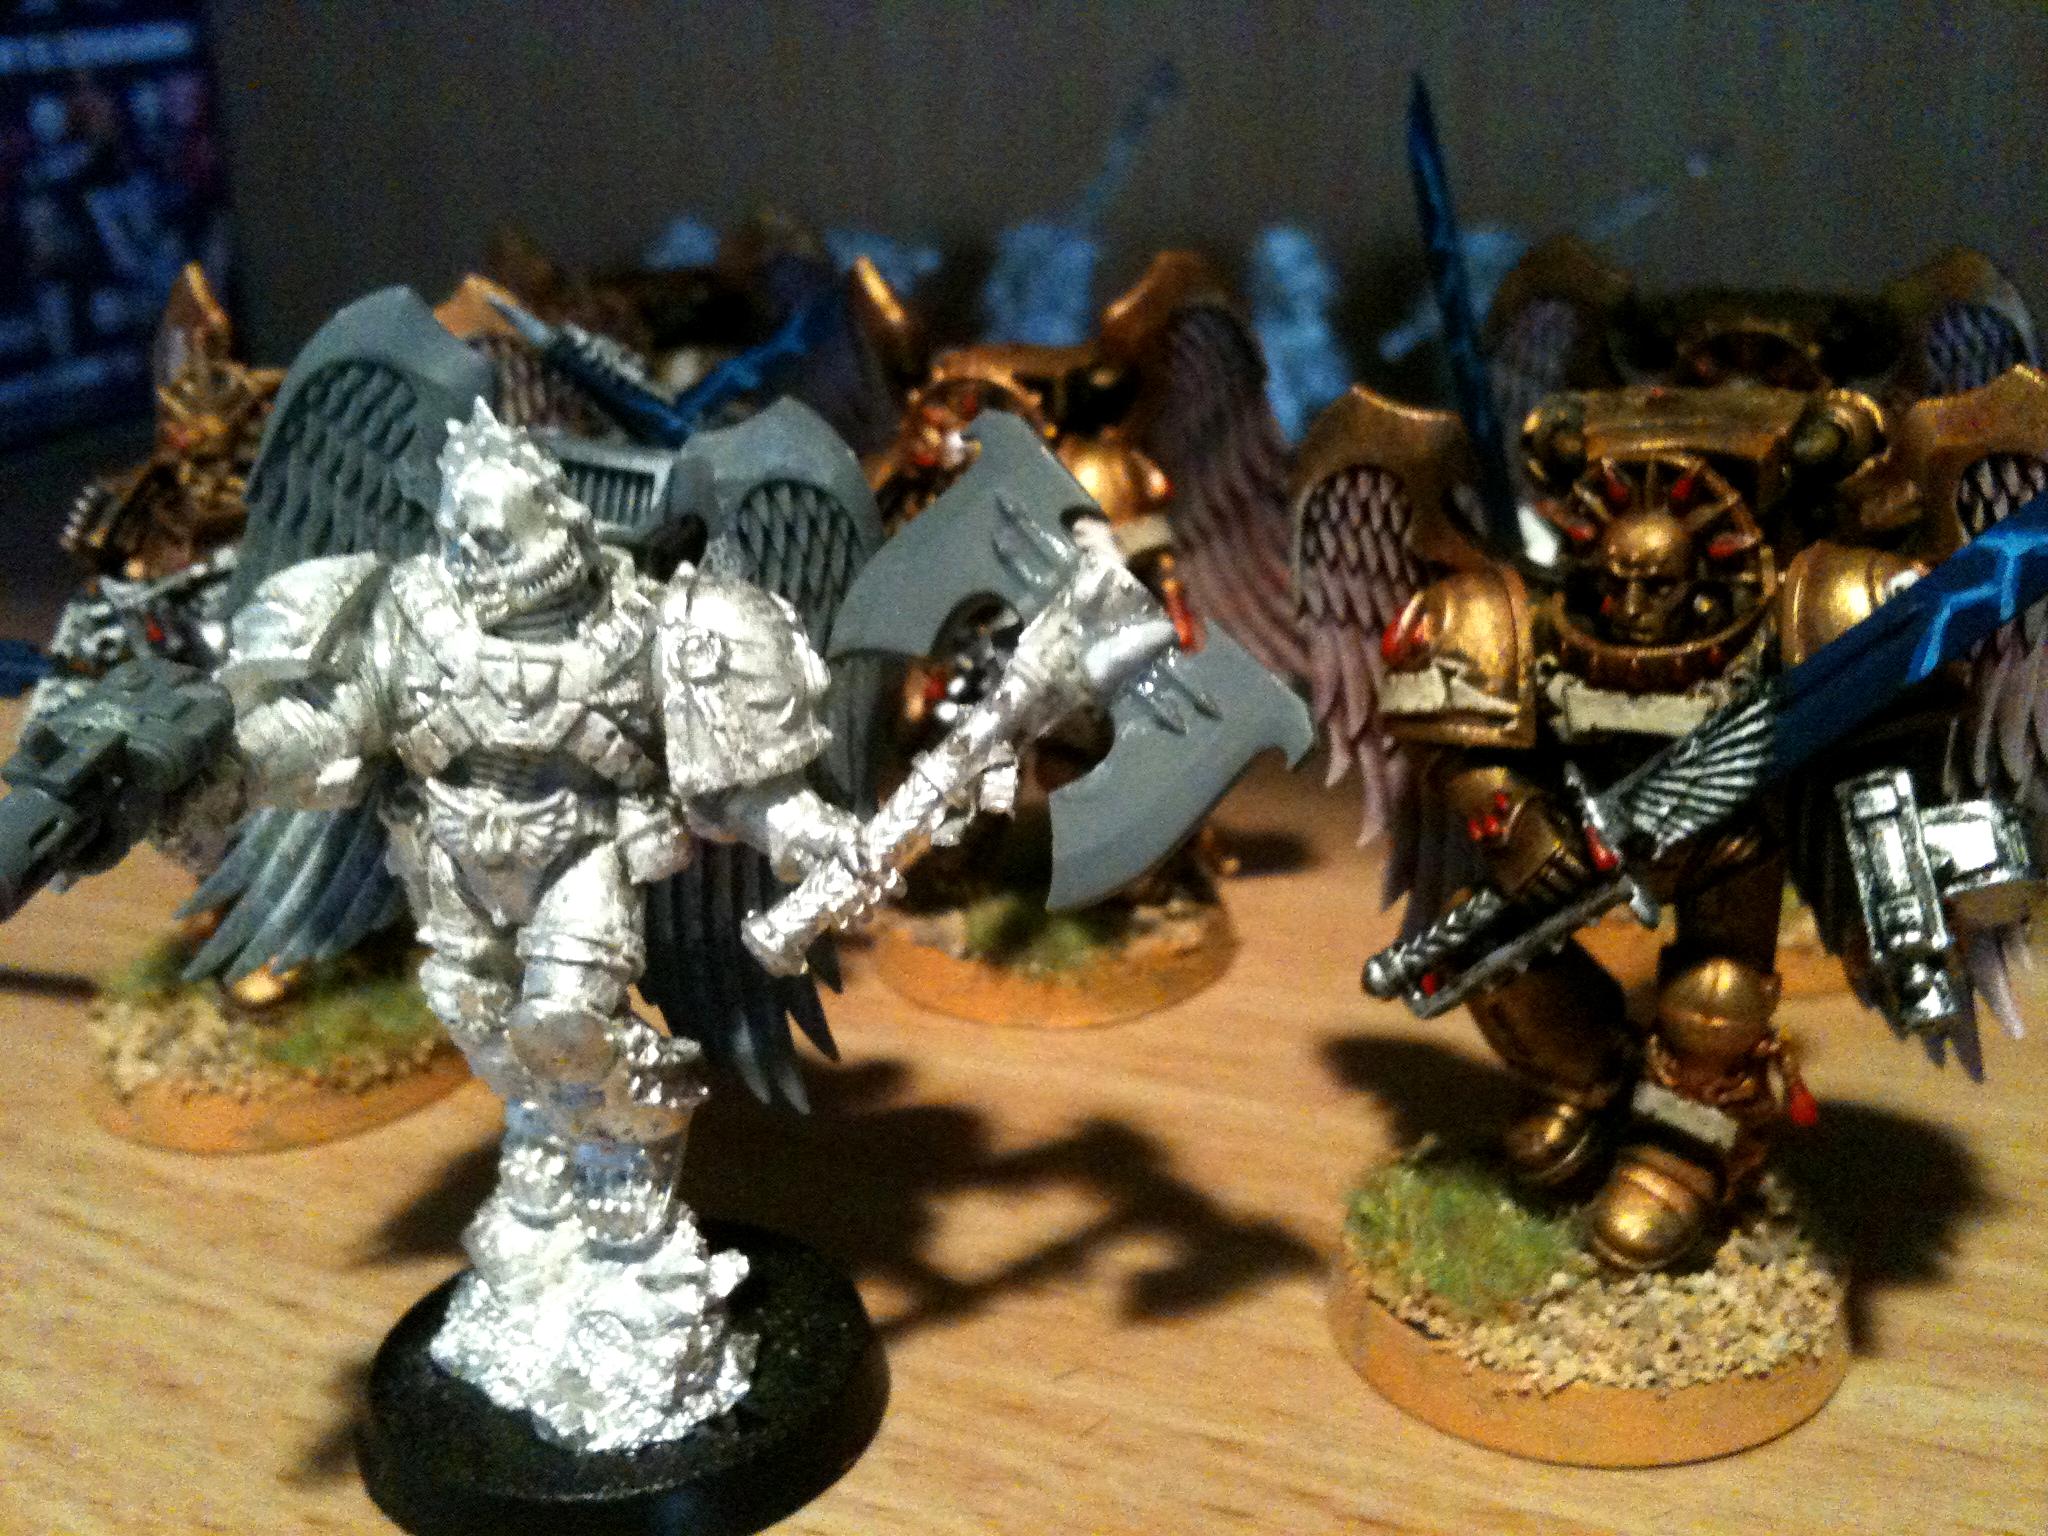 Reclusiarch w/ Sanguinary Guard